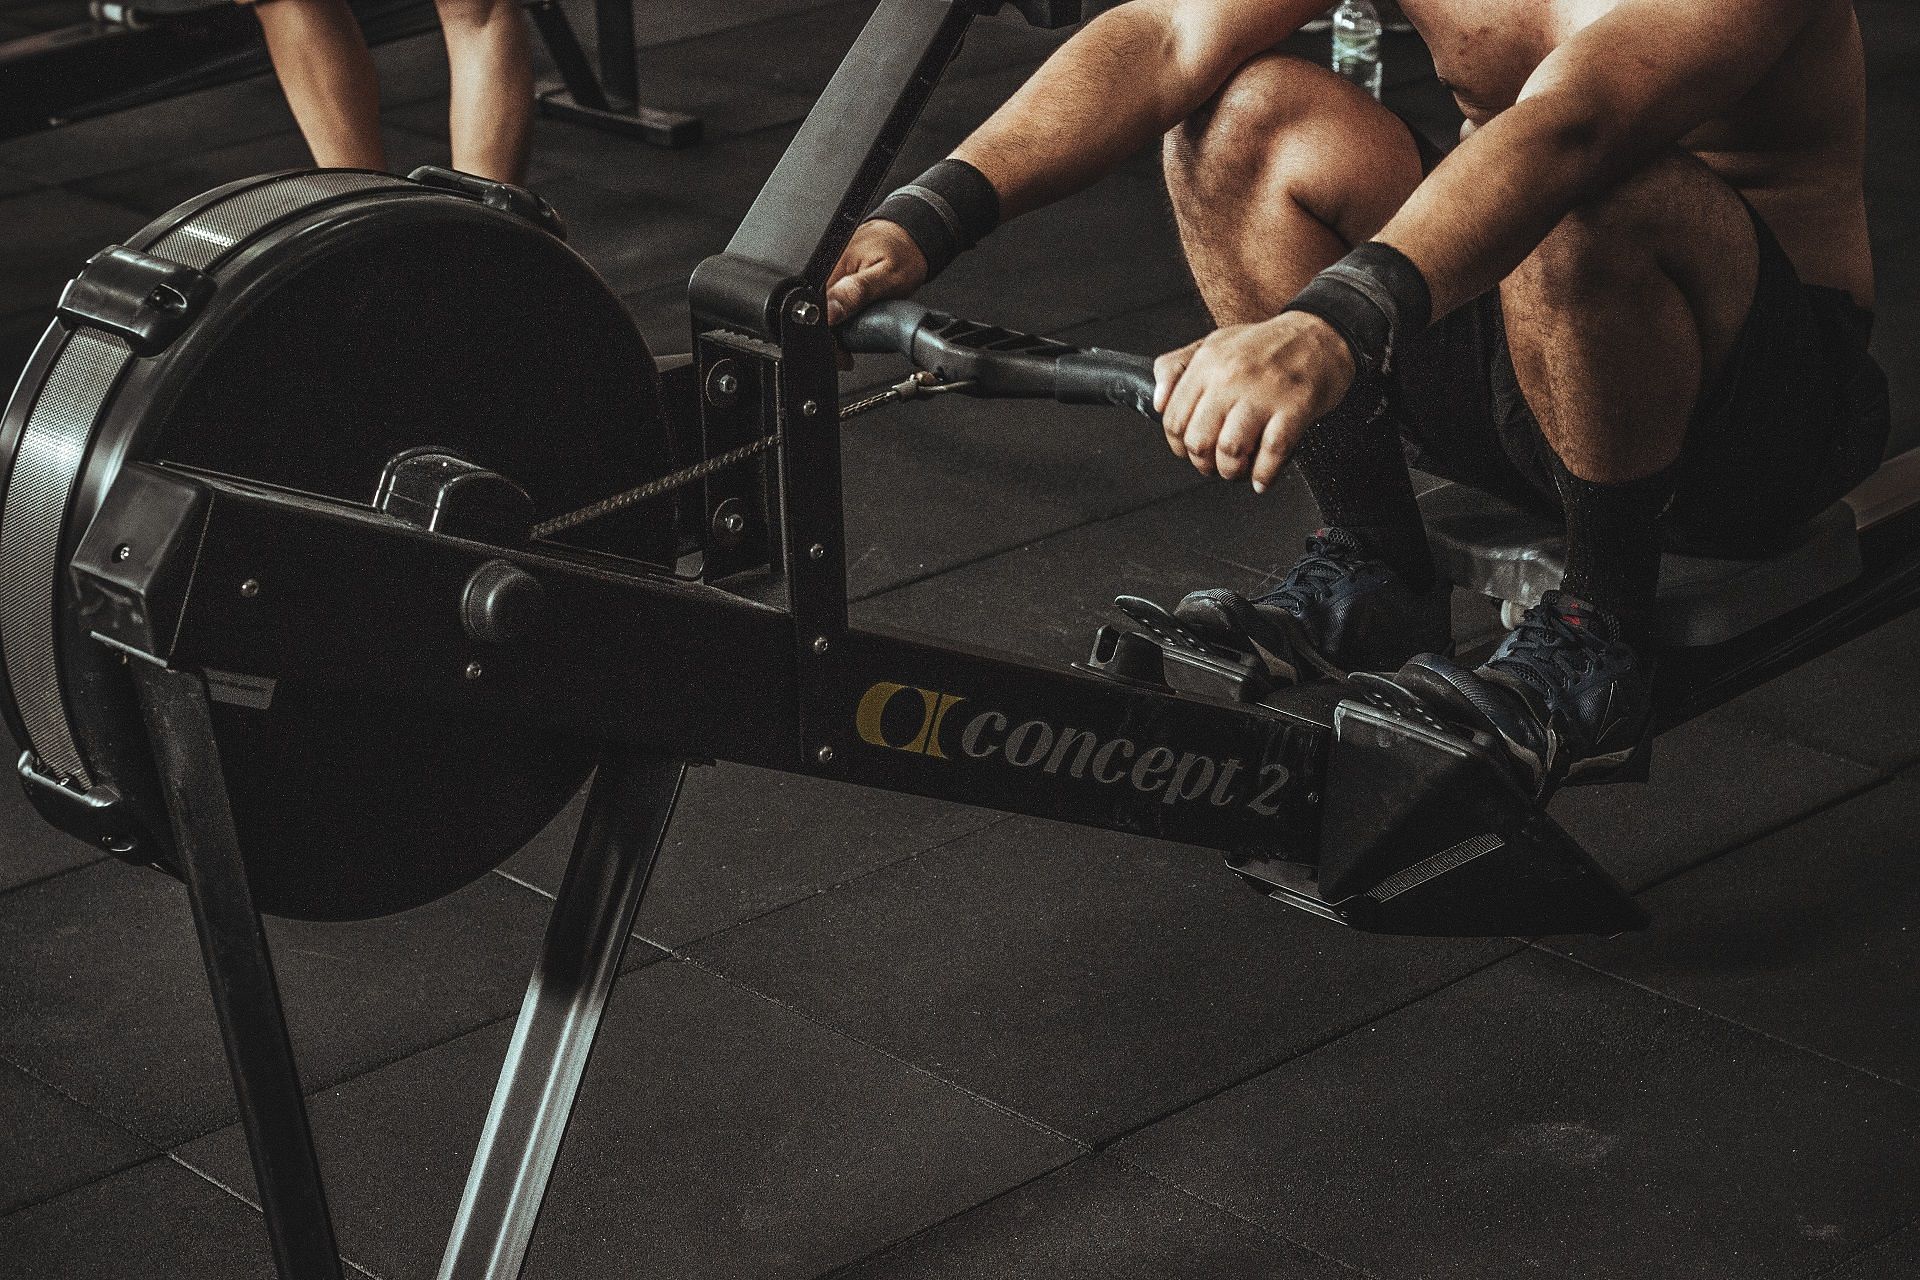 Rowing for a full body workout. (Image via Unsplash/Victor Freitas)